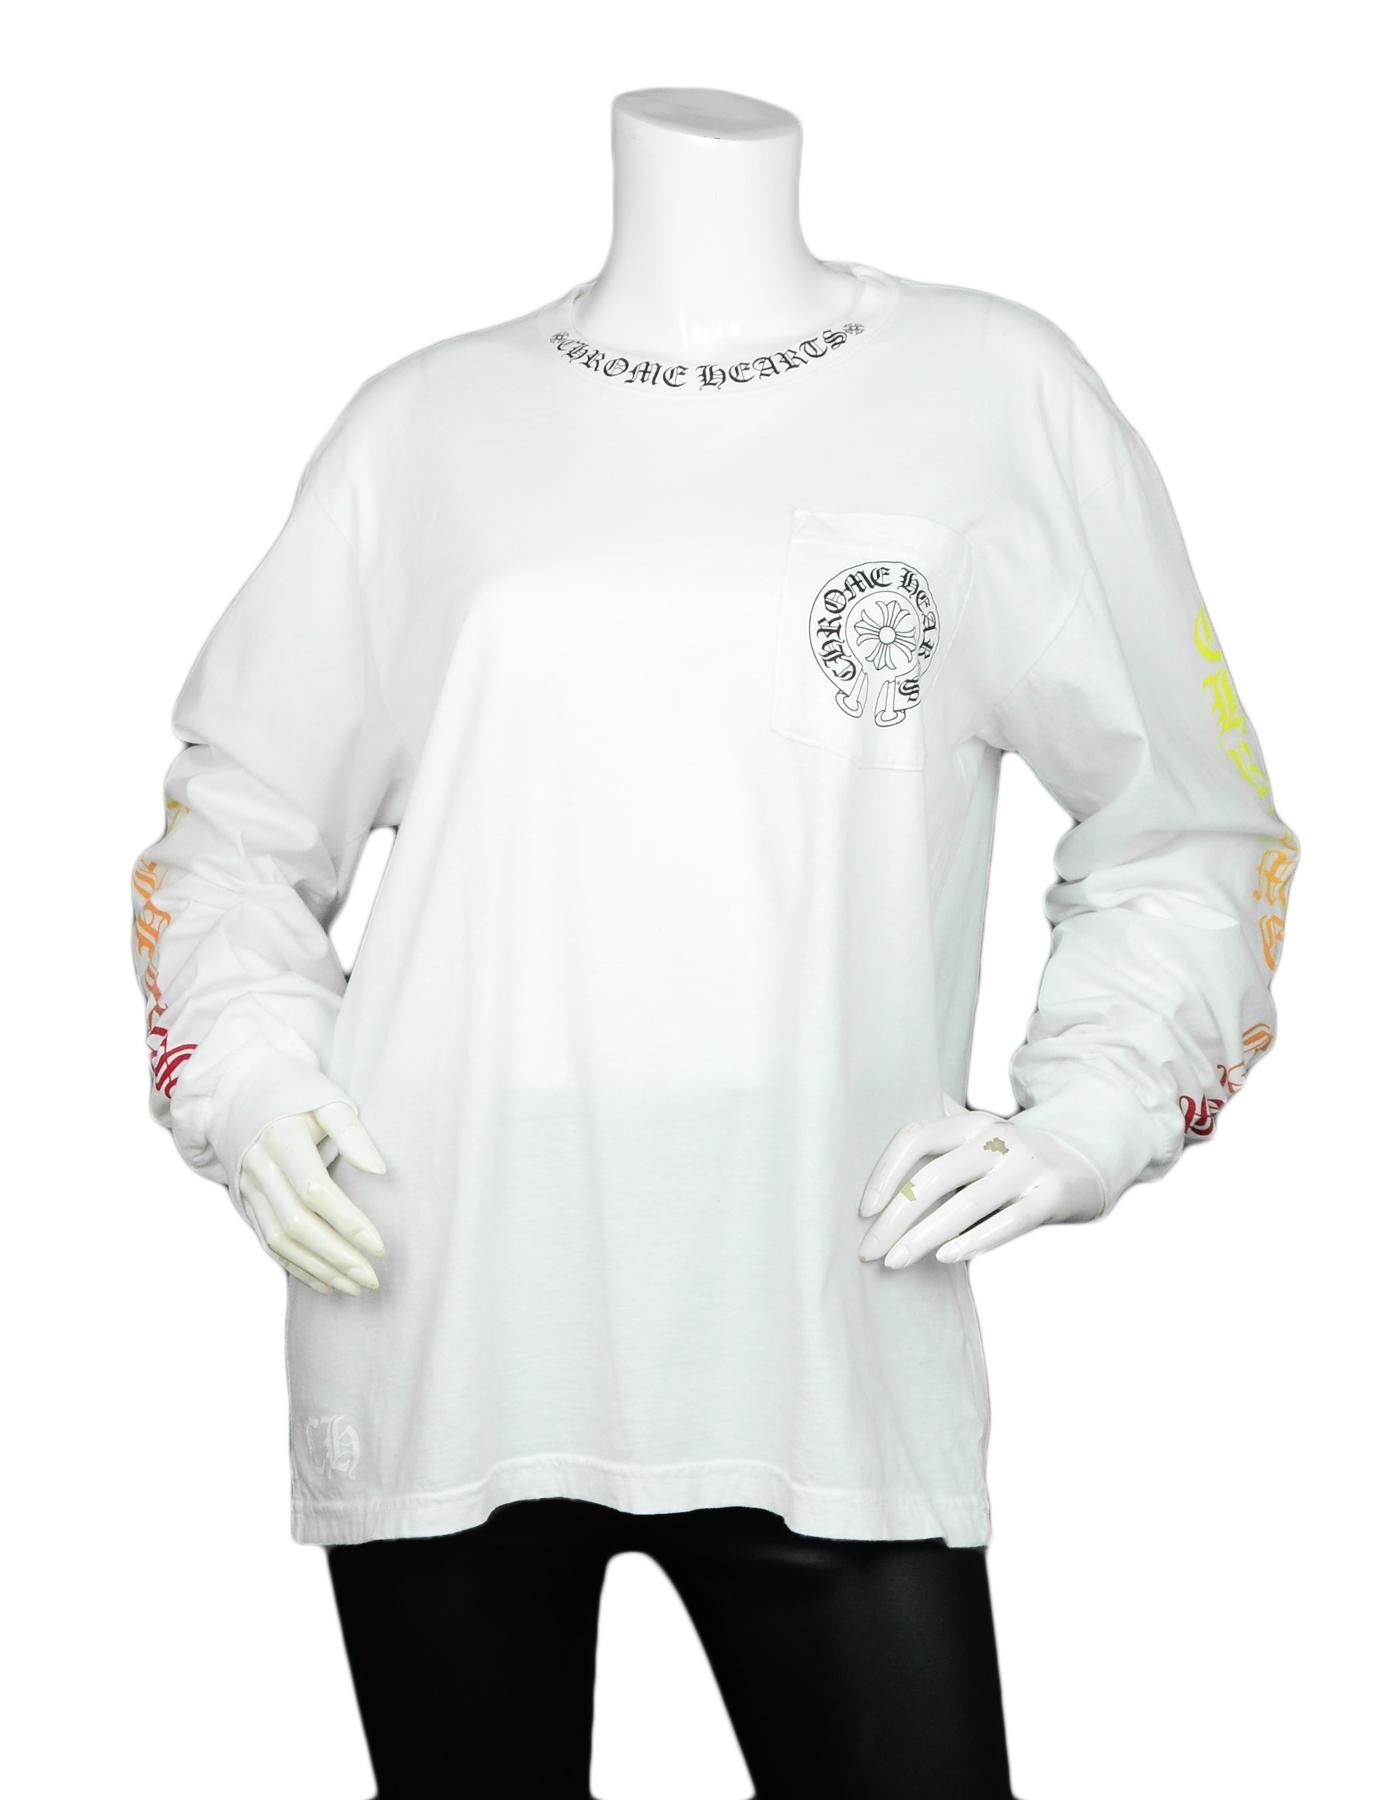 Chrome Hearts White Cotton Longsleeve T-Shirt sz L

Made In: USA
Color: White
Materials: 100% Cotton
Lining: 100% Cotton
Opening/Closure: Slip on
Overall Condition: Excellent pre-owned condition

Tag Size: Large *Please refer to measurements to